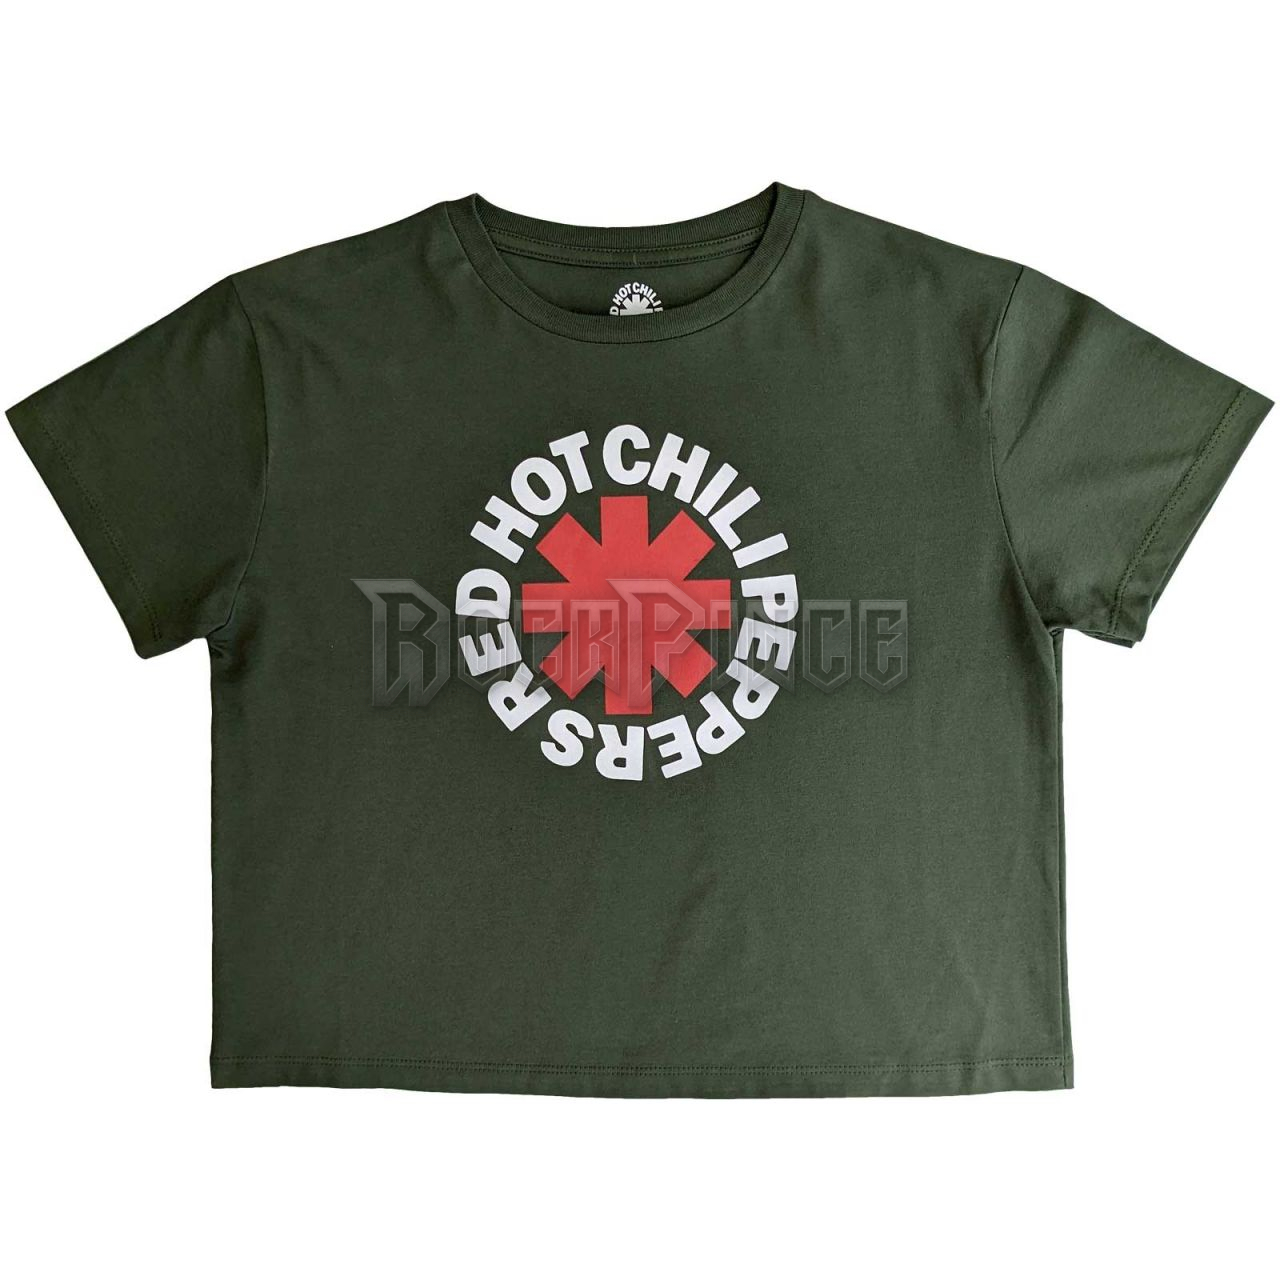 Red Hot Chili Peppers - Classic Asterisk - női crop top - RHCPCT01LGR